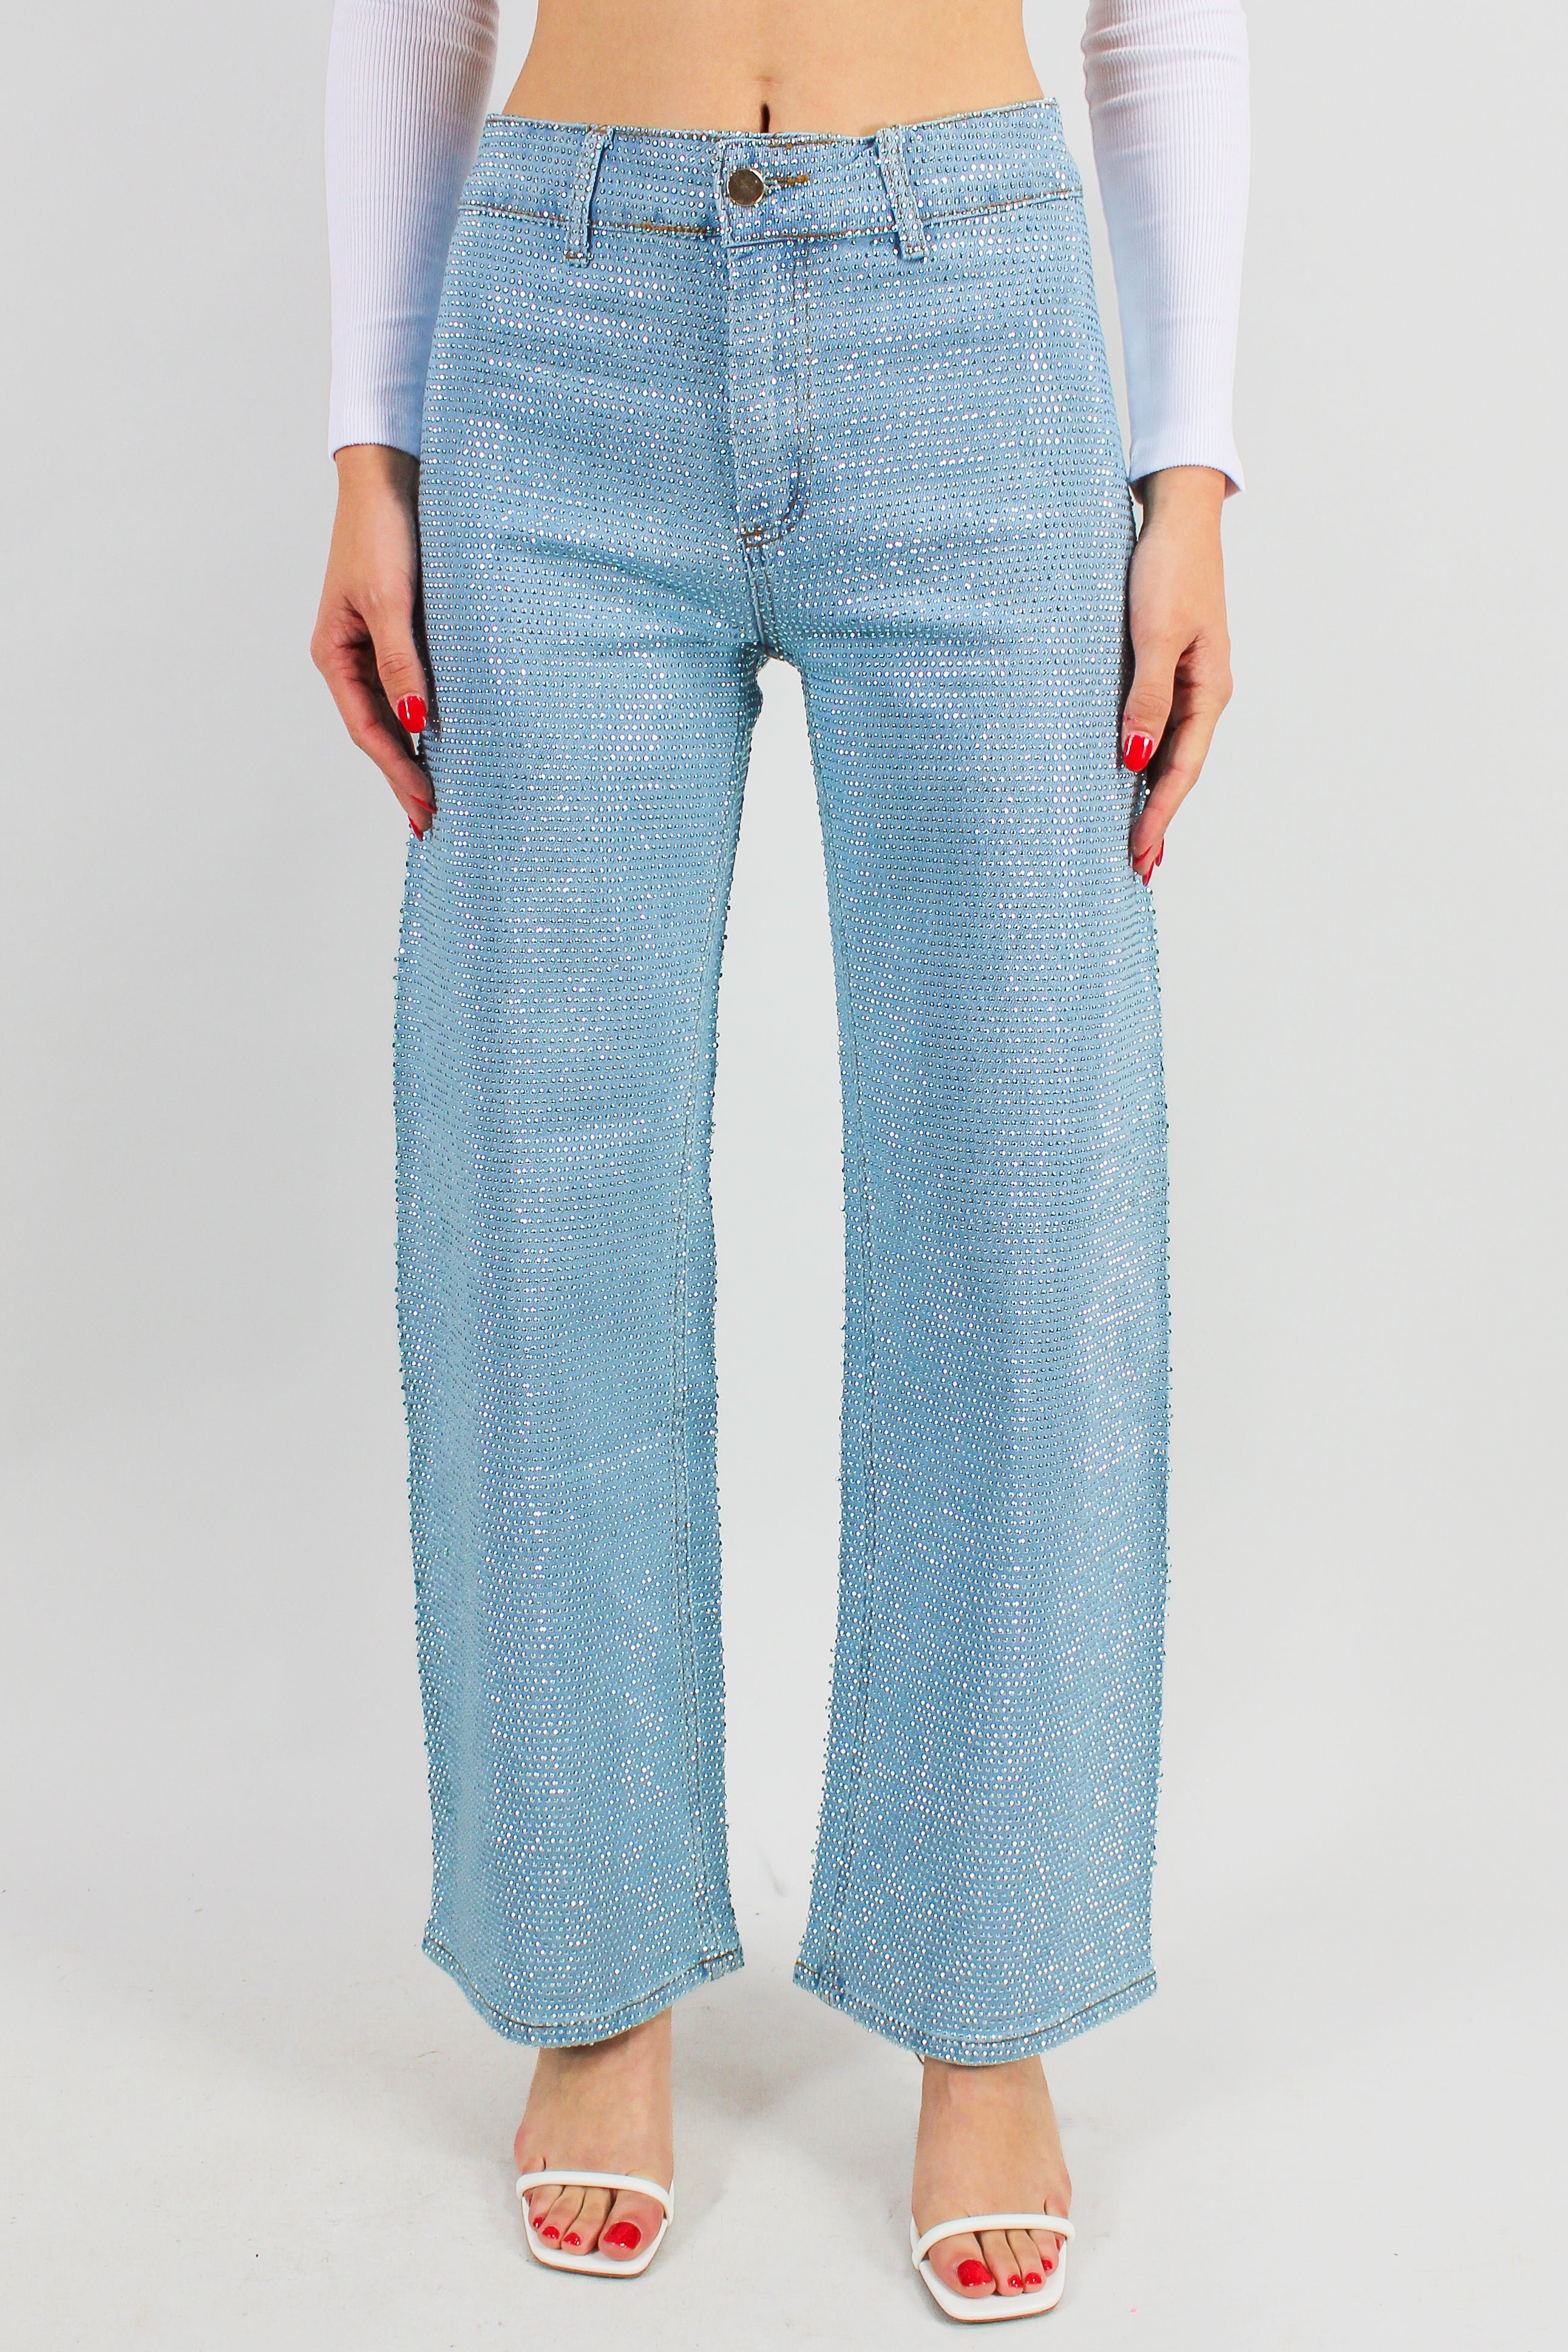 Frock Candy Up and Out Rhinestone Jeans Light Denim / M